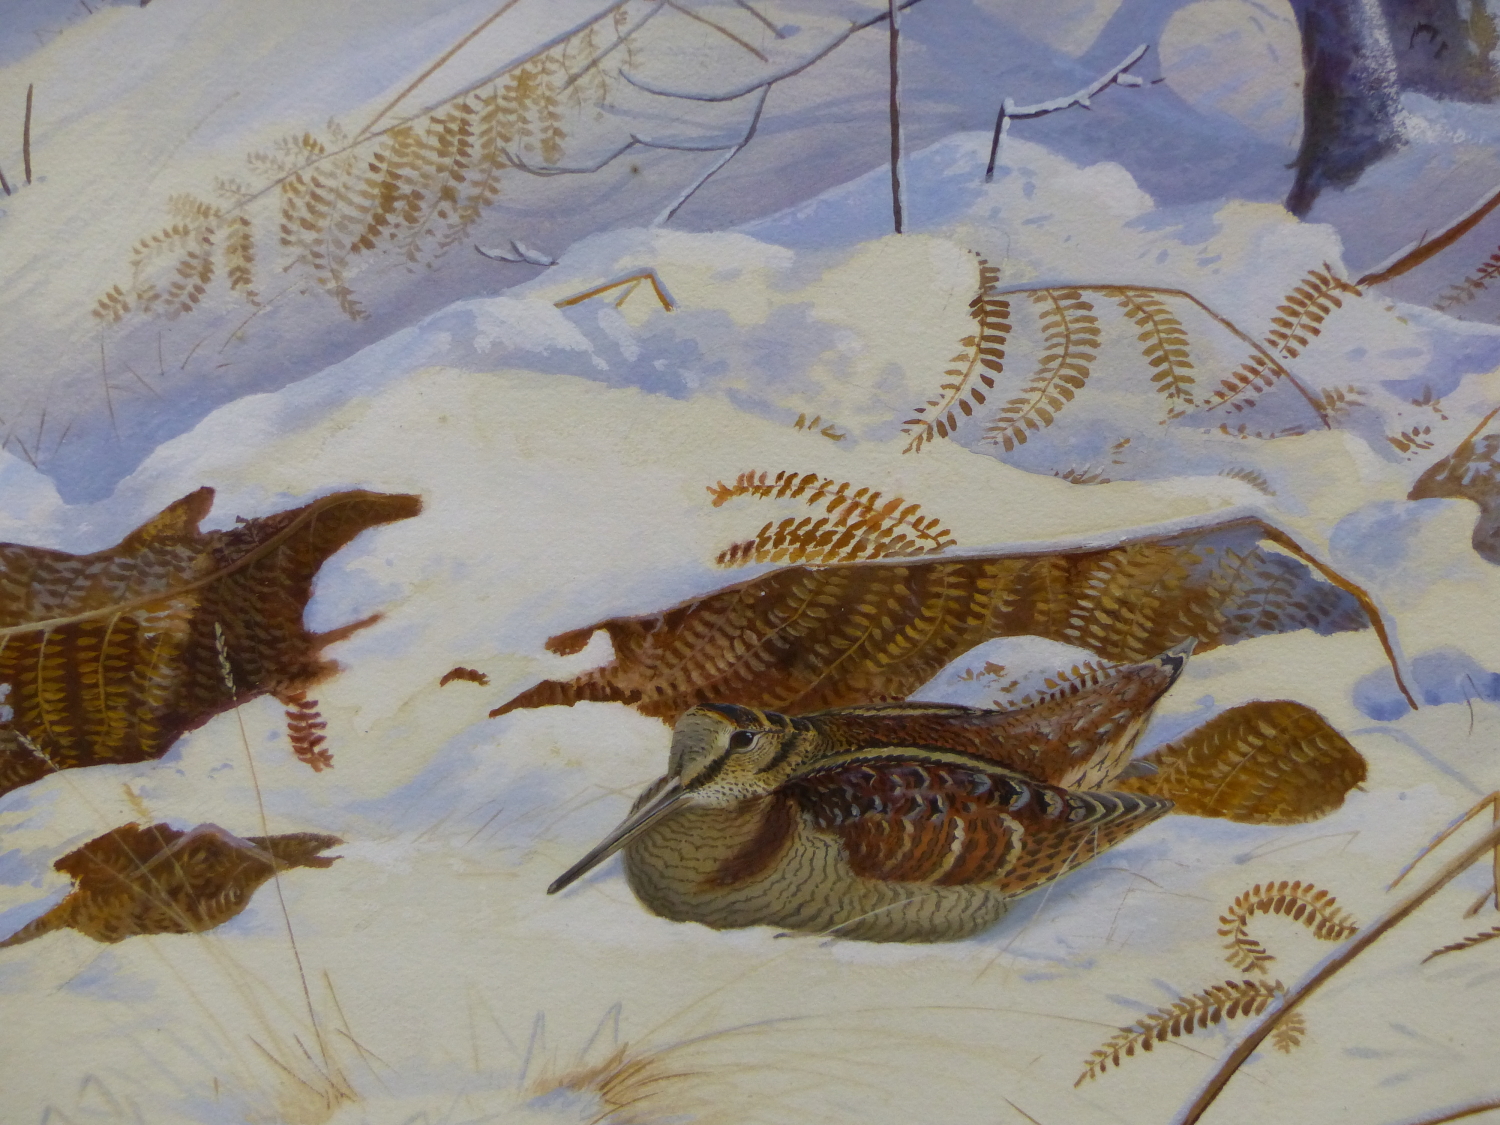 PHILIP RICKMAN. (1891-1982) ARR. WOODCOCKS IN SNOW, SIGNED AND DATED WATERCOLOUR WITH GALLERY